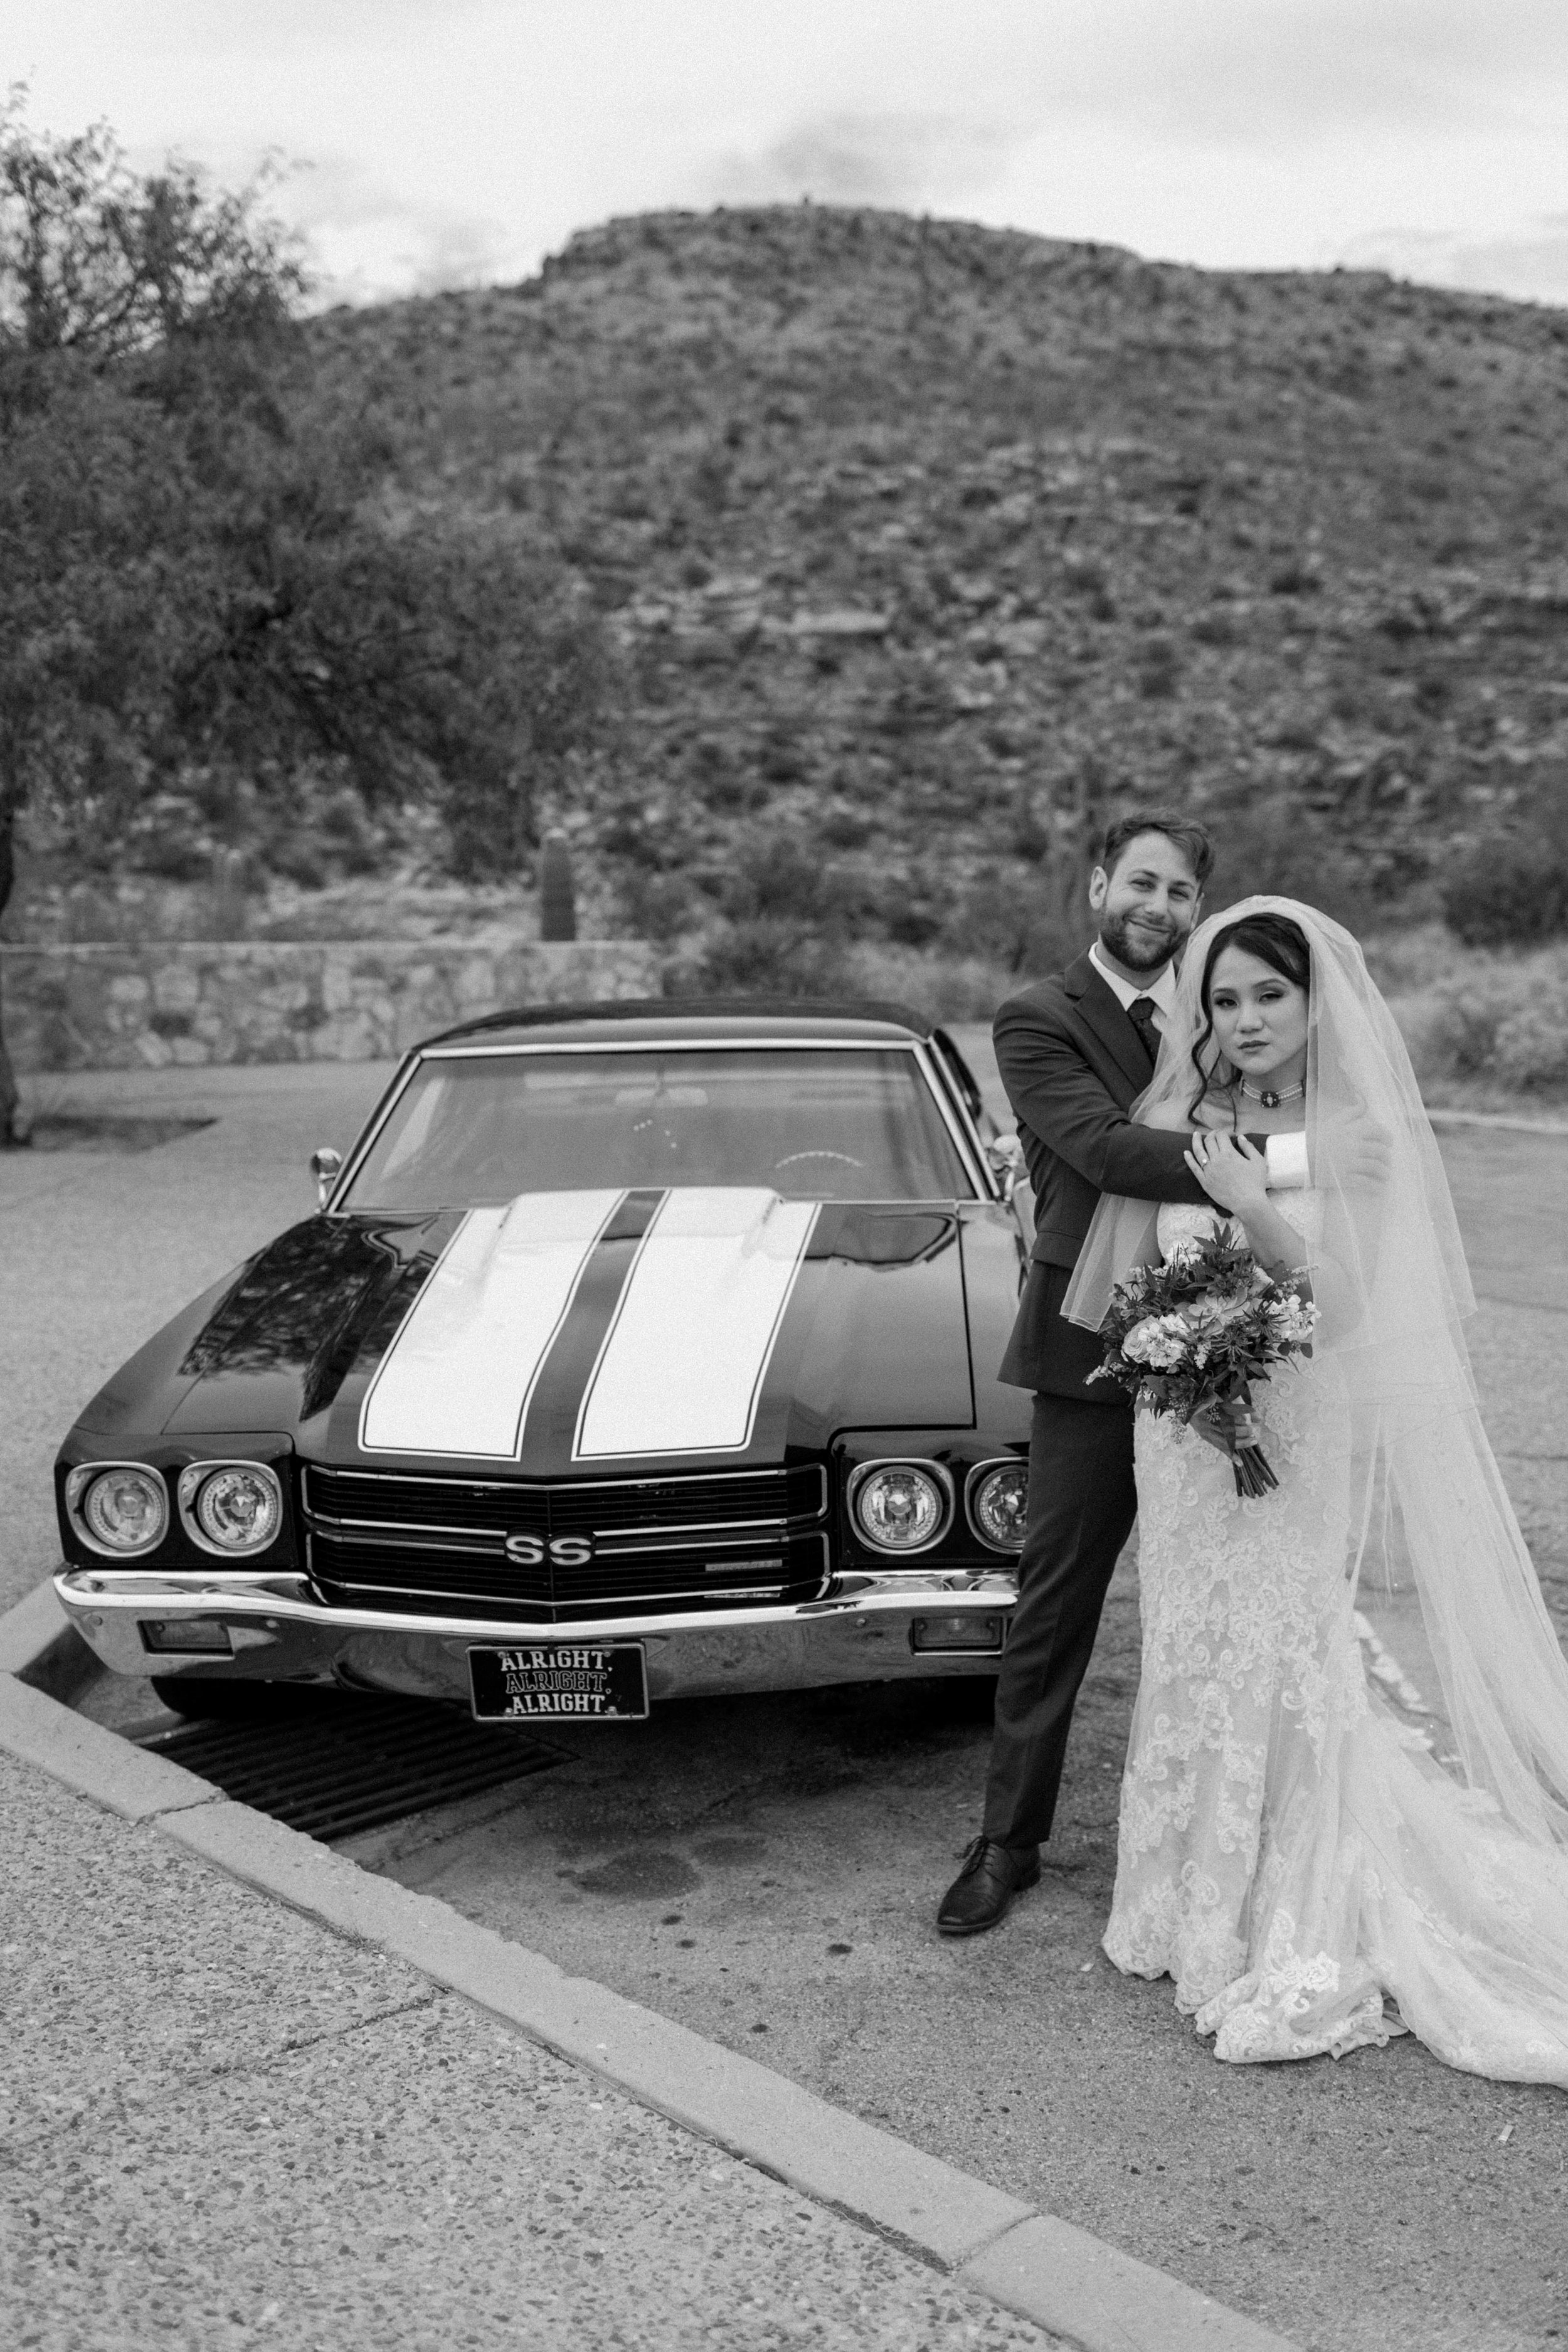  married couple standing next to vintage car after ceremony of rock climbing session 